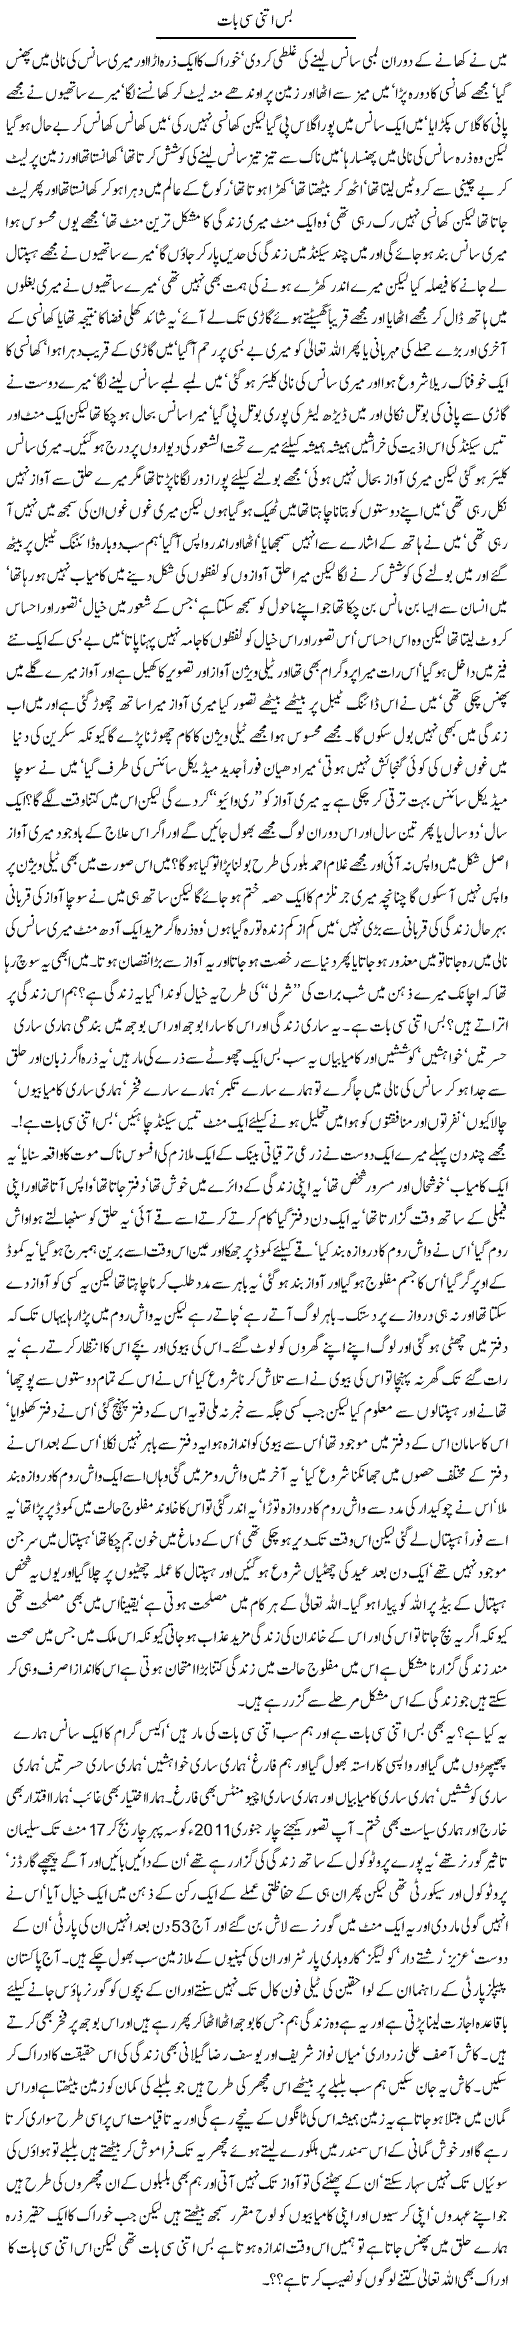 Small Talk Express Column Javed Chaudhry 27 February 2011